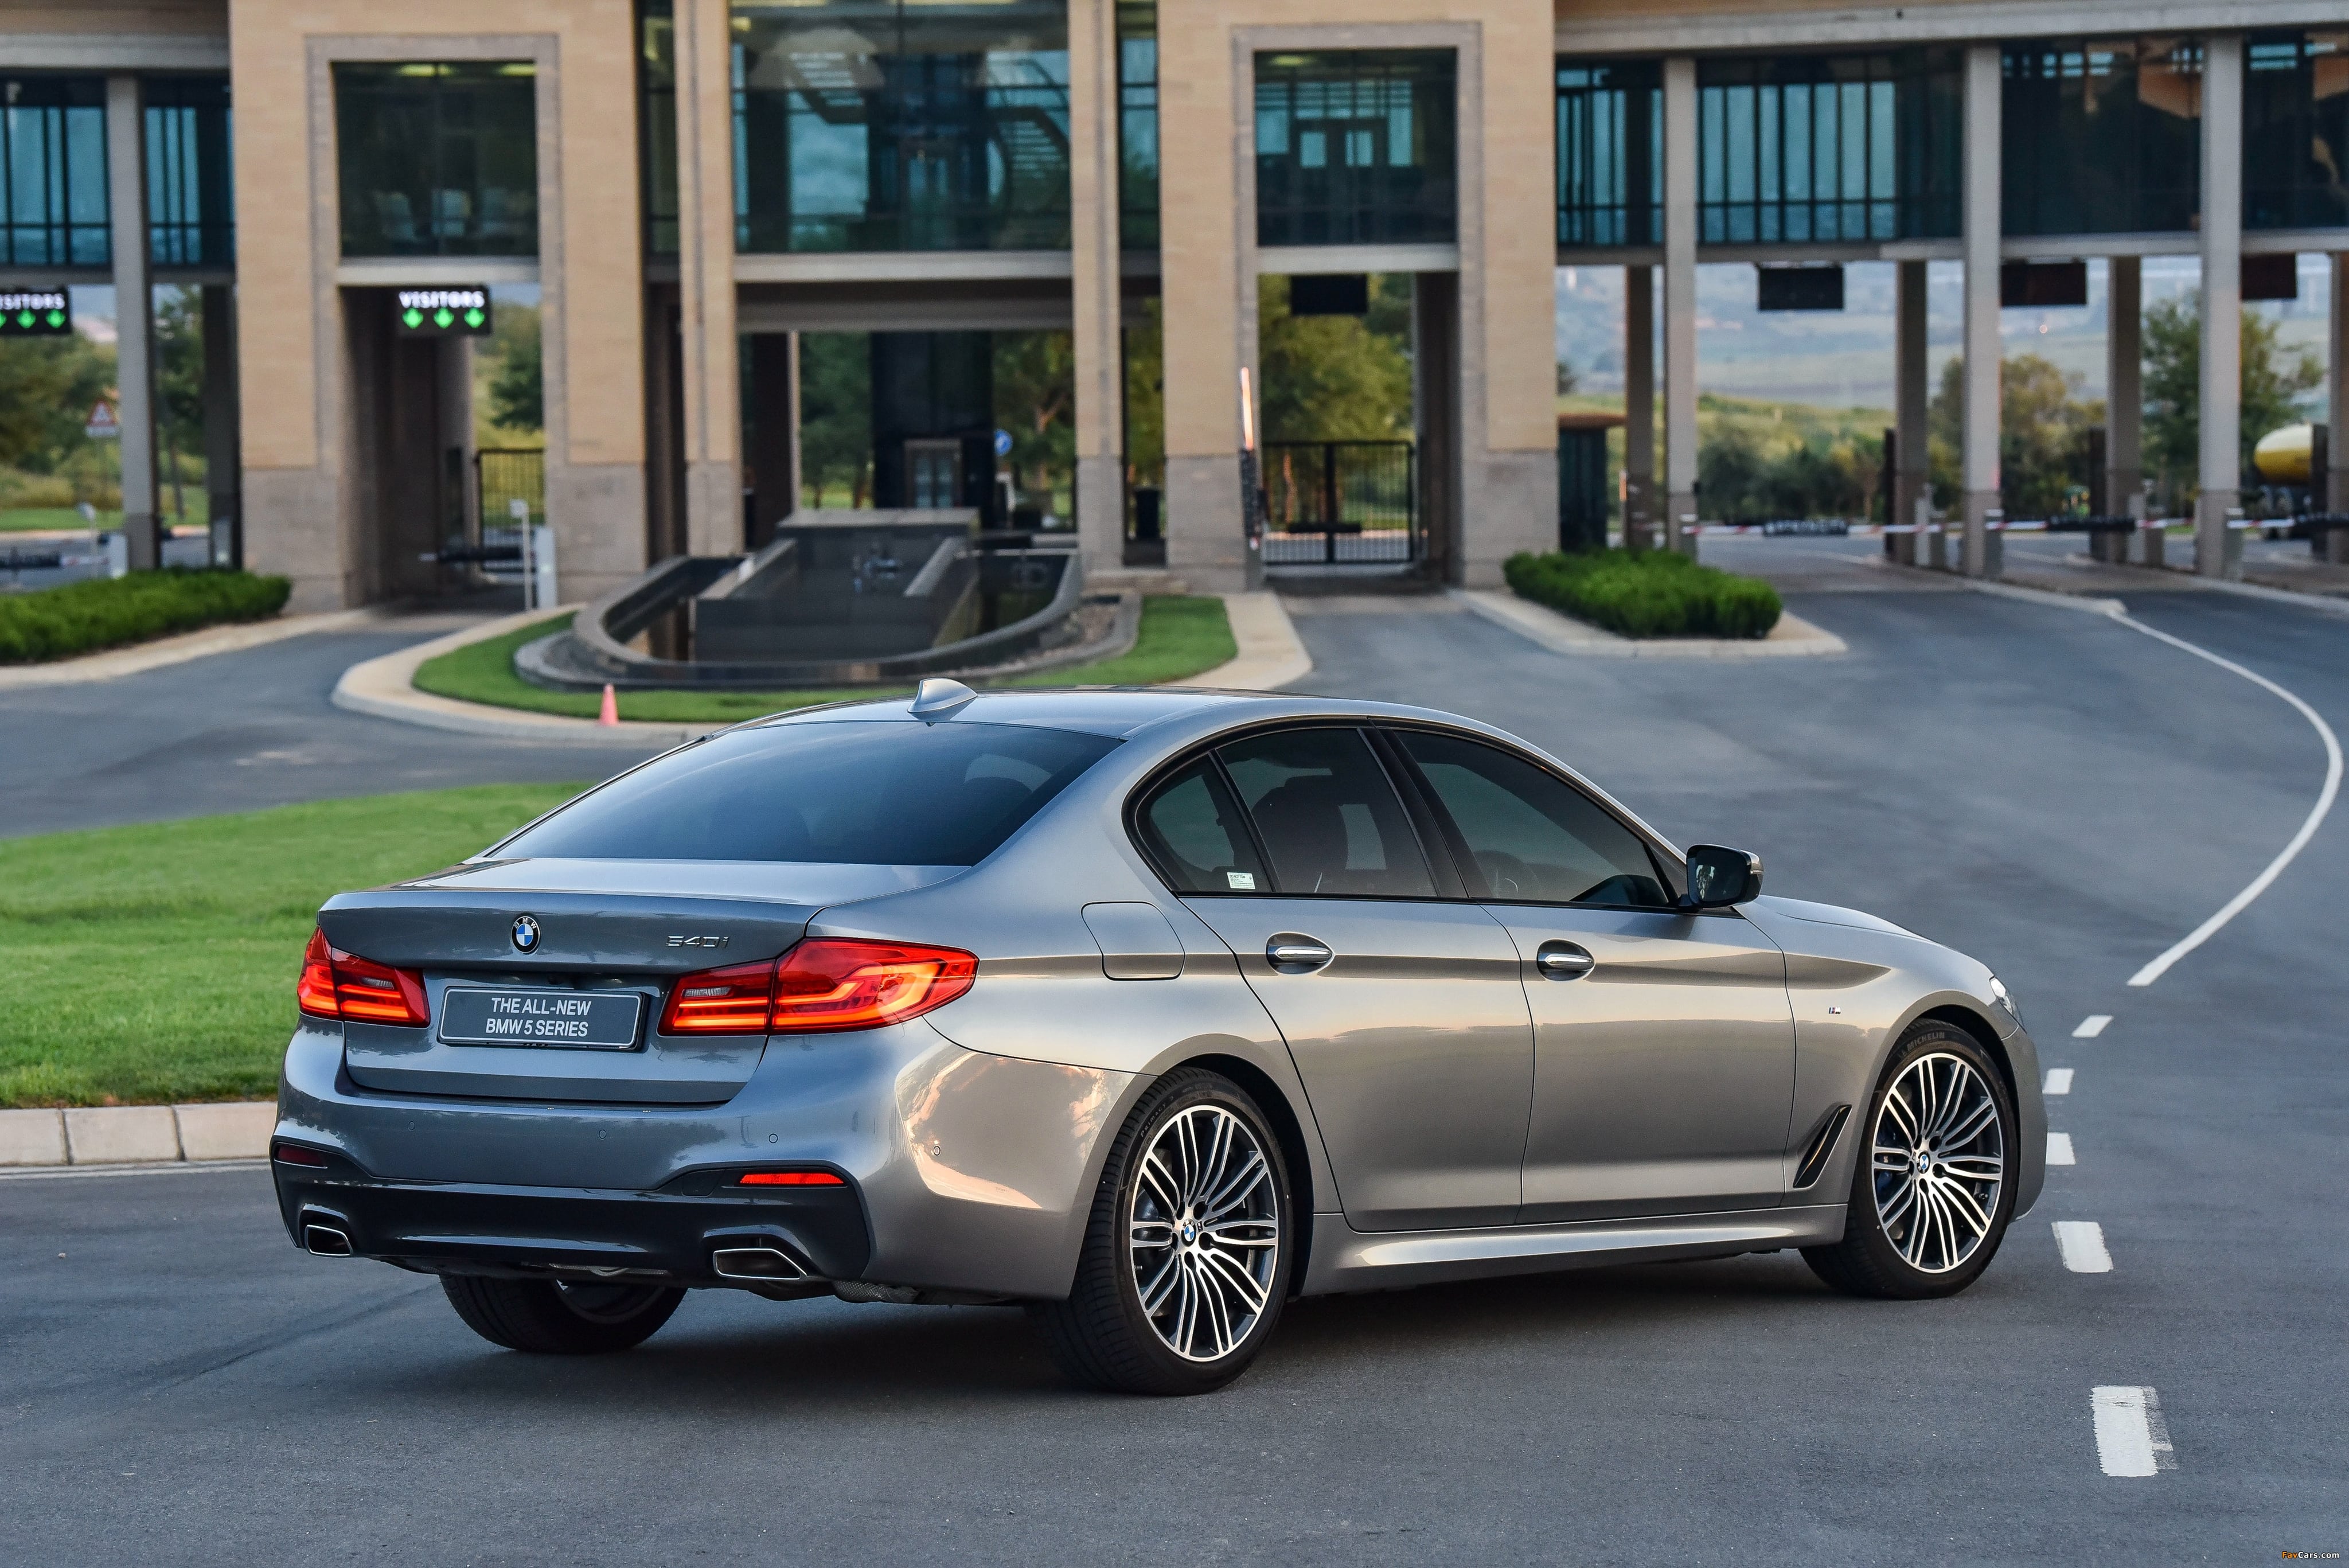 bmw_5-series_2017_pictures_23-min.jpg